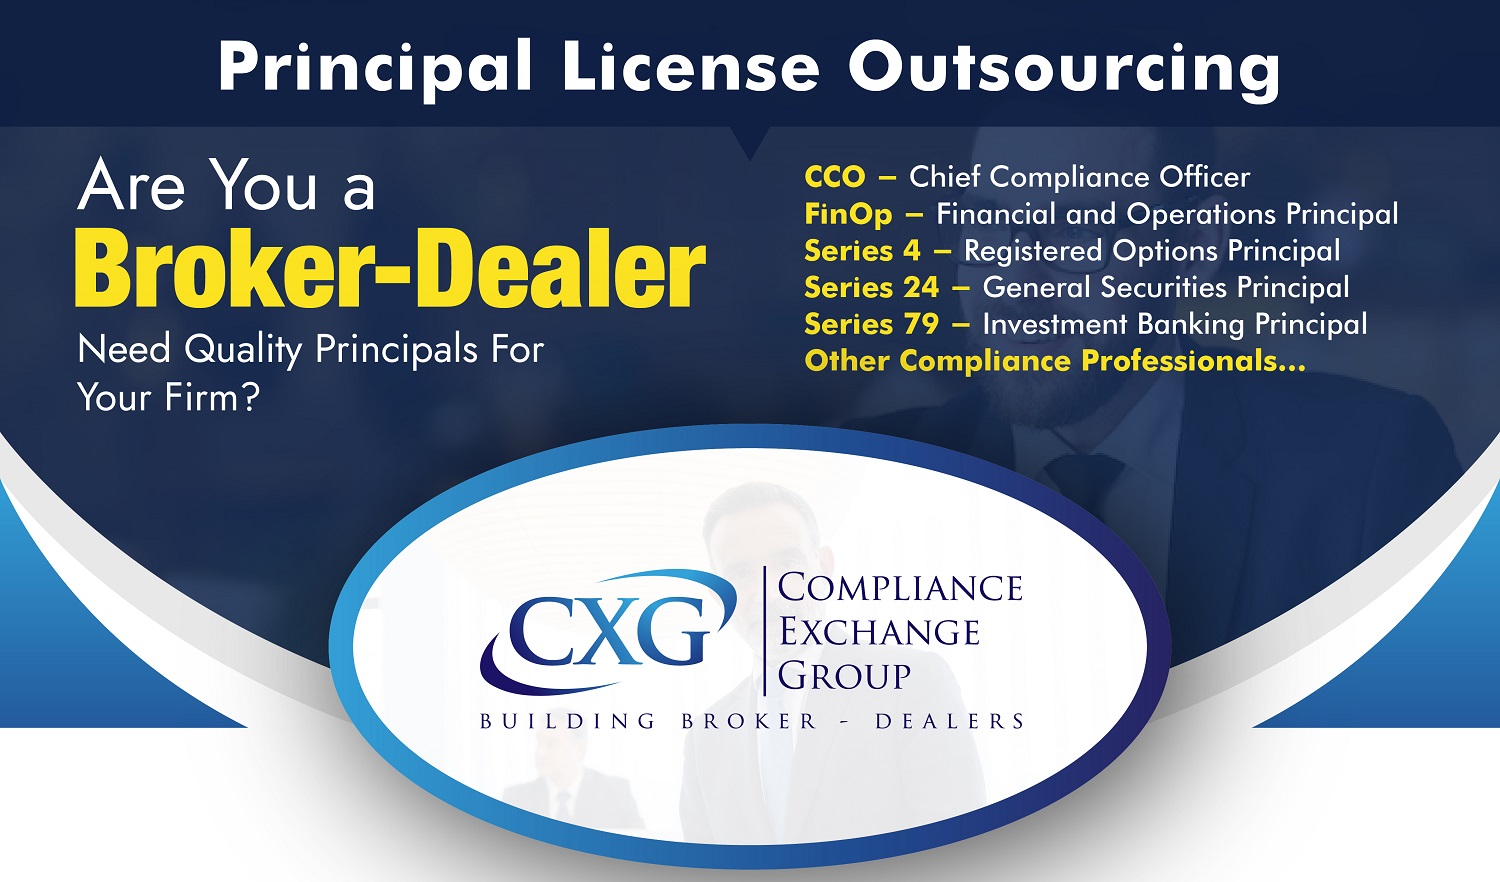 Principal License Outsourcing | Principal Operations Outsourcing | Compliance Exchange Group